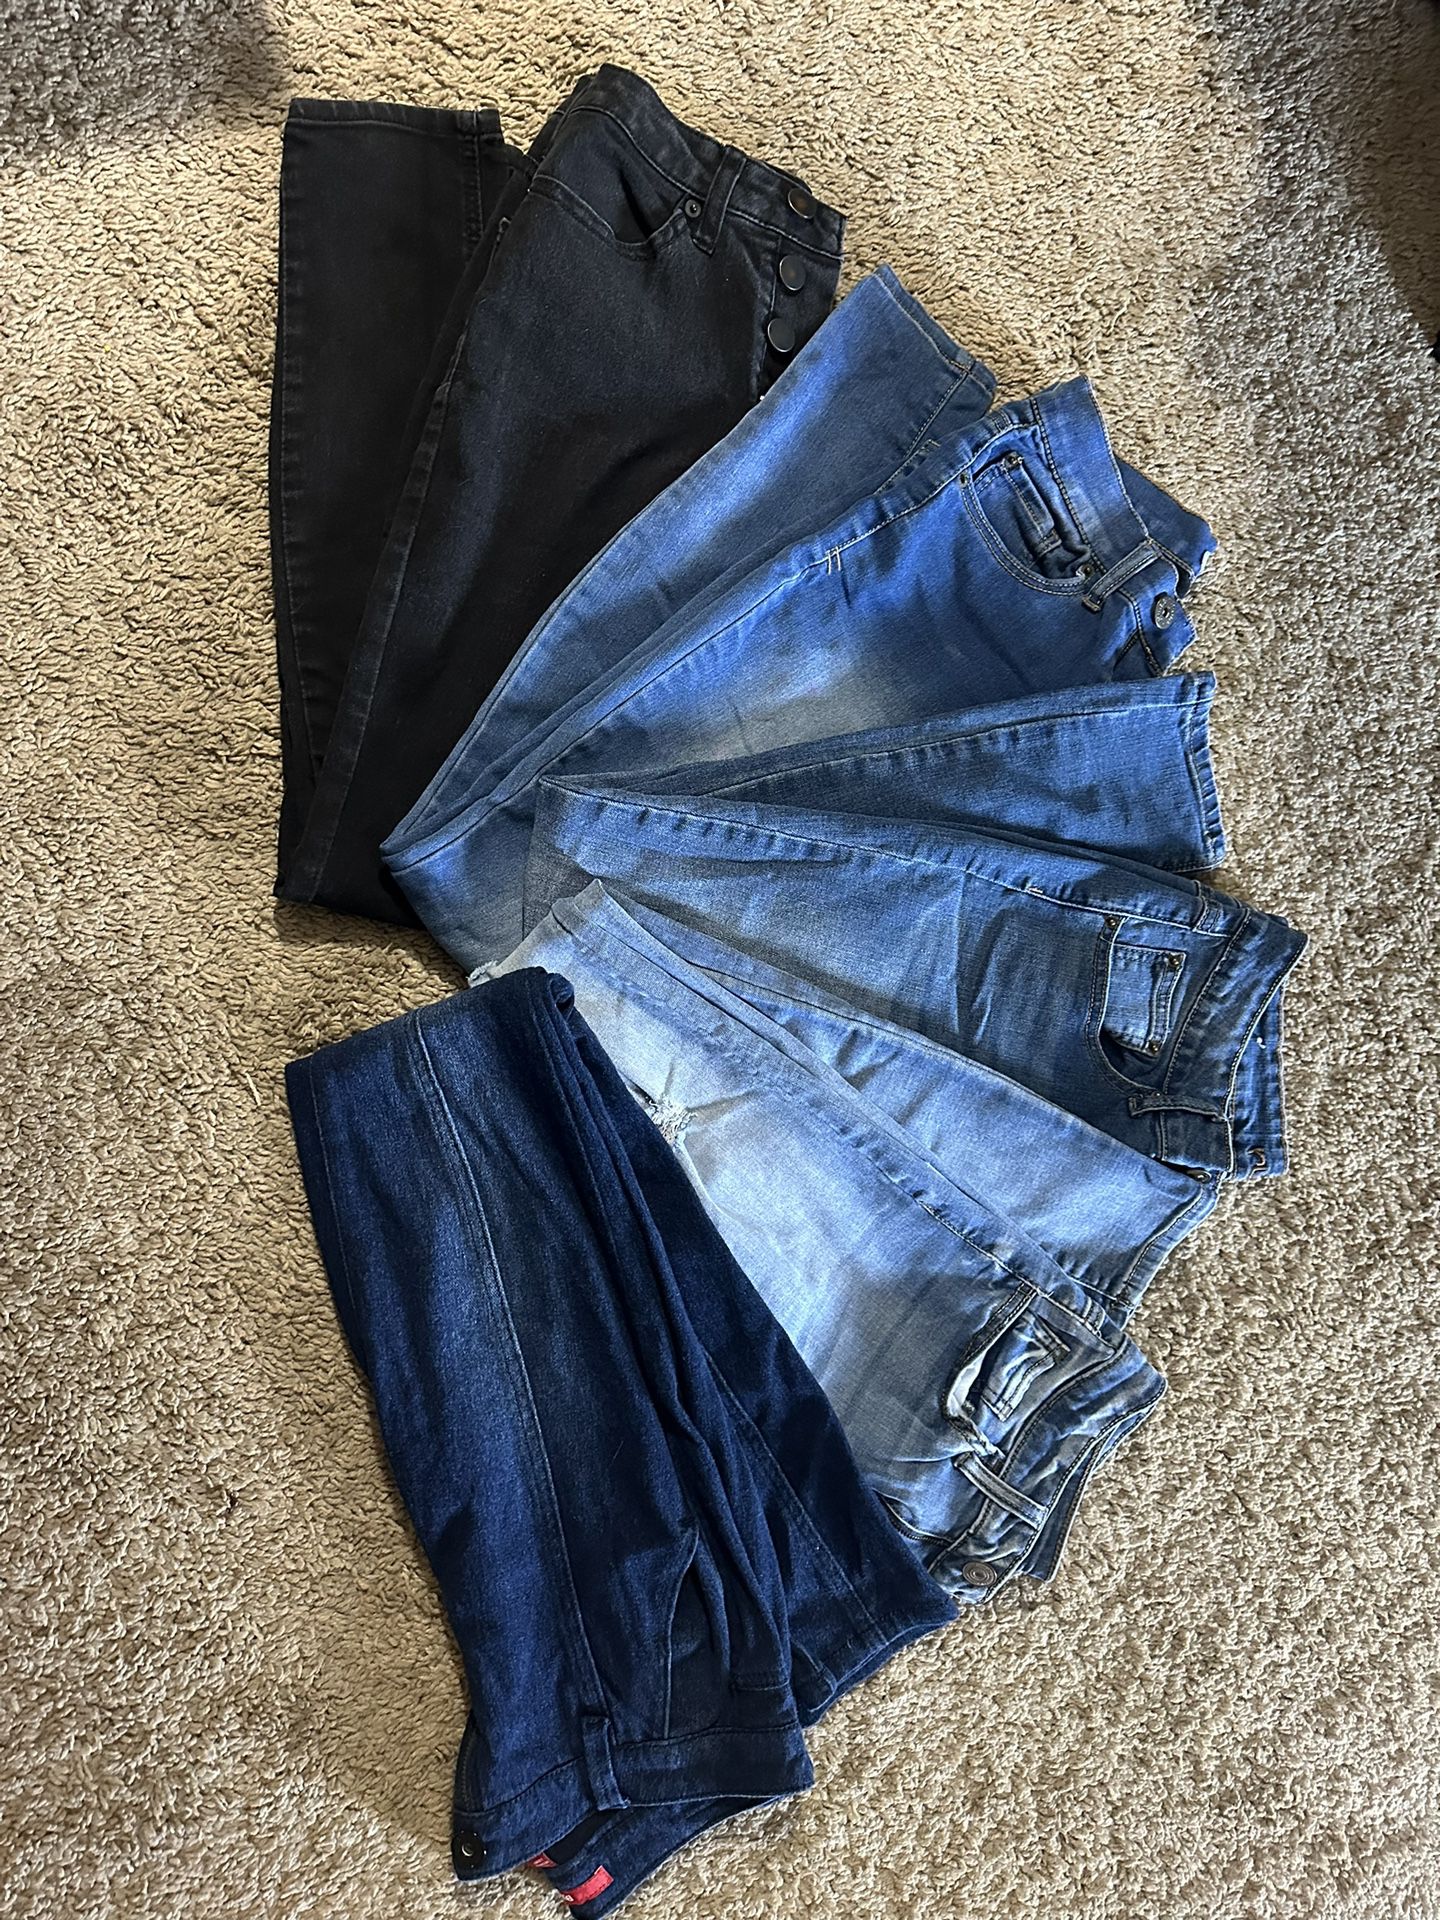 5 Pairs Of Woman’s Jeans